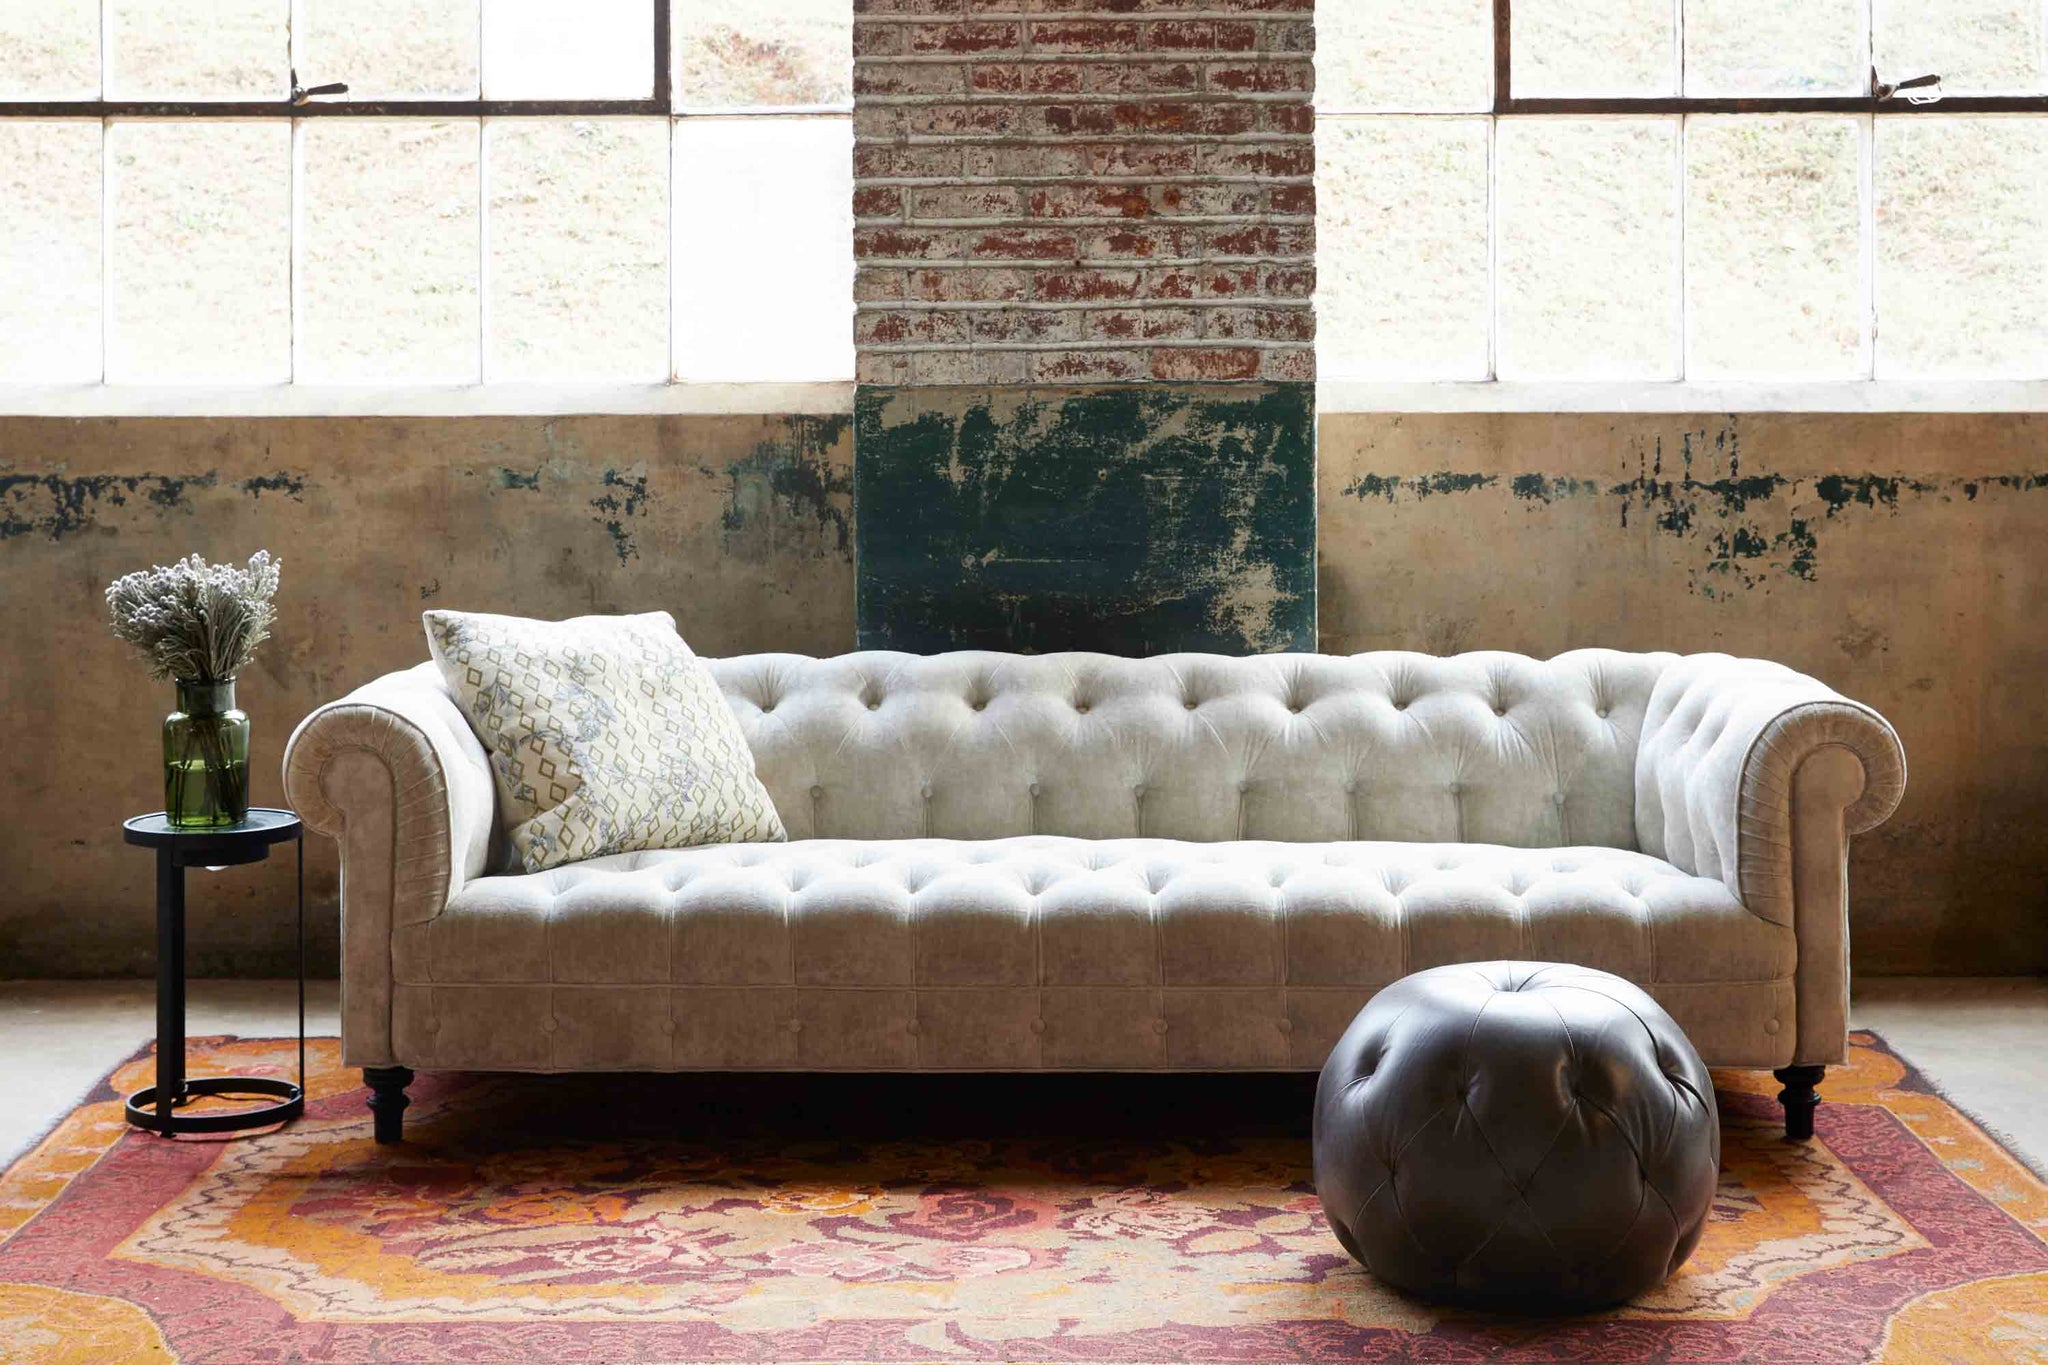  Daytime lighting of the Brook sofa in a Velluto Natural fabric, with 2 large windows and a brick wall. There is a leather ottoman in dark leather and a Rotor side table to the left. The rug has a floral pattern in the red and orange tones. 